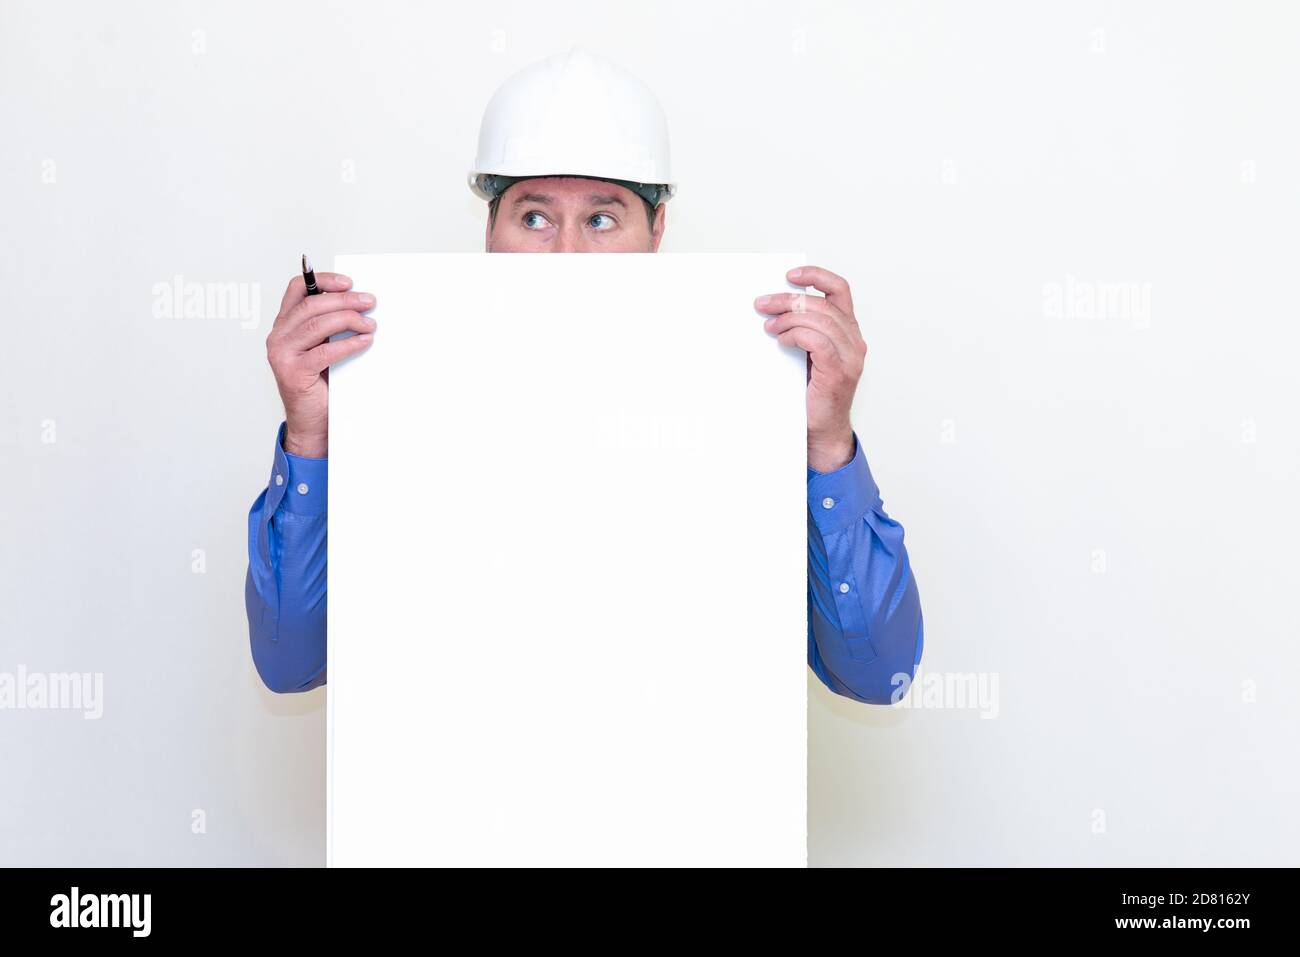 Close-up Engineer man wearing a helmet and reflector vest, standing and holding a billboard. White background. Stock Photo